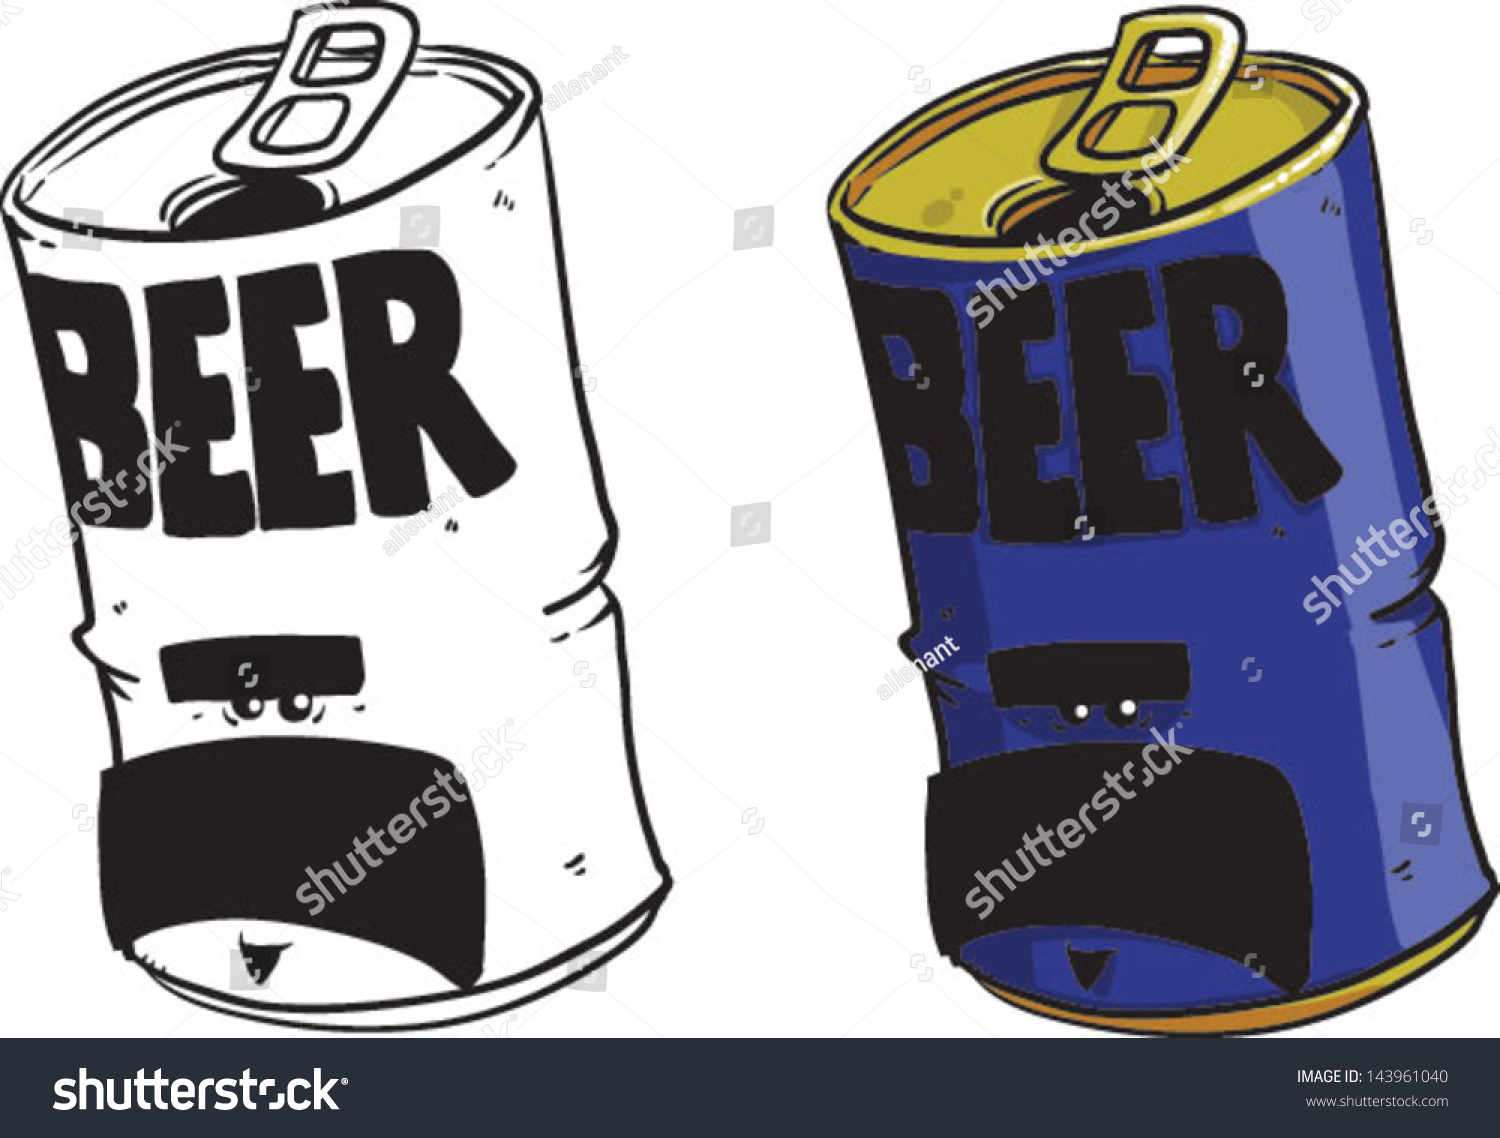 beer can clipart free - photo #45